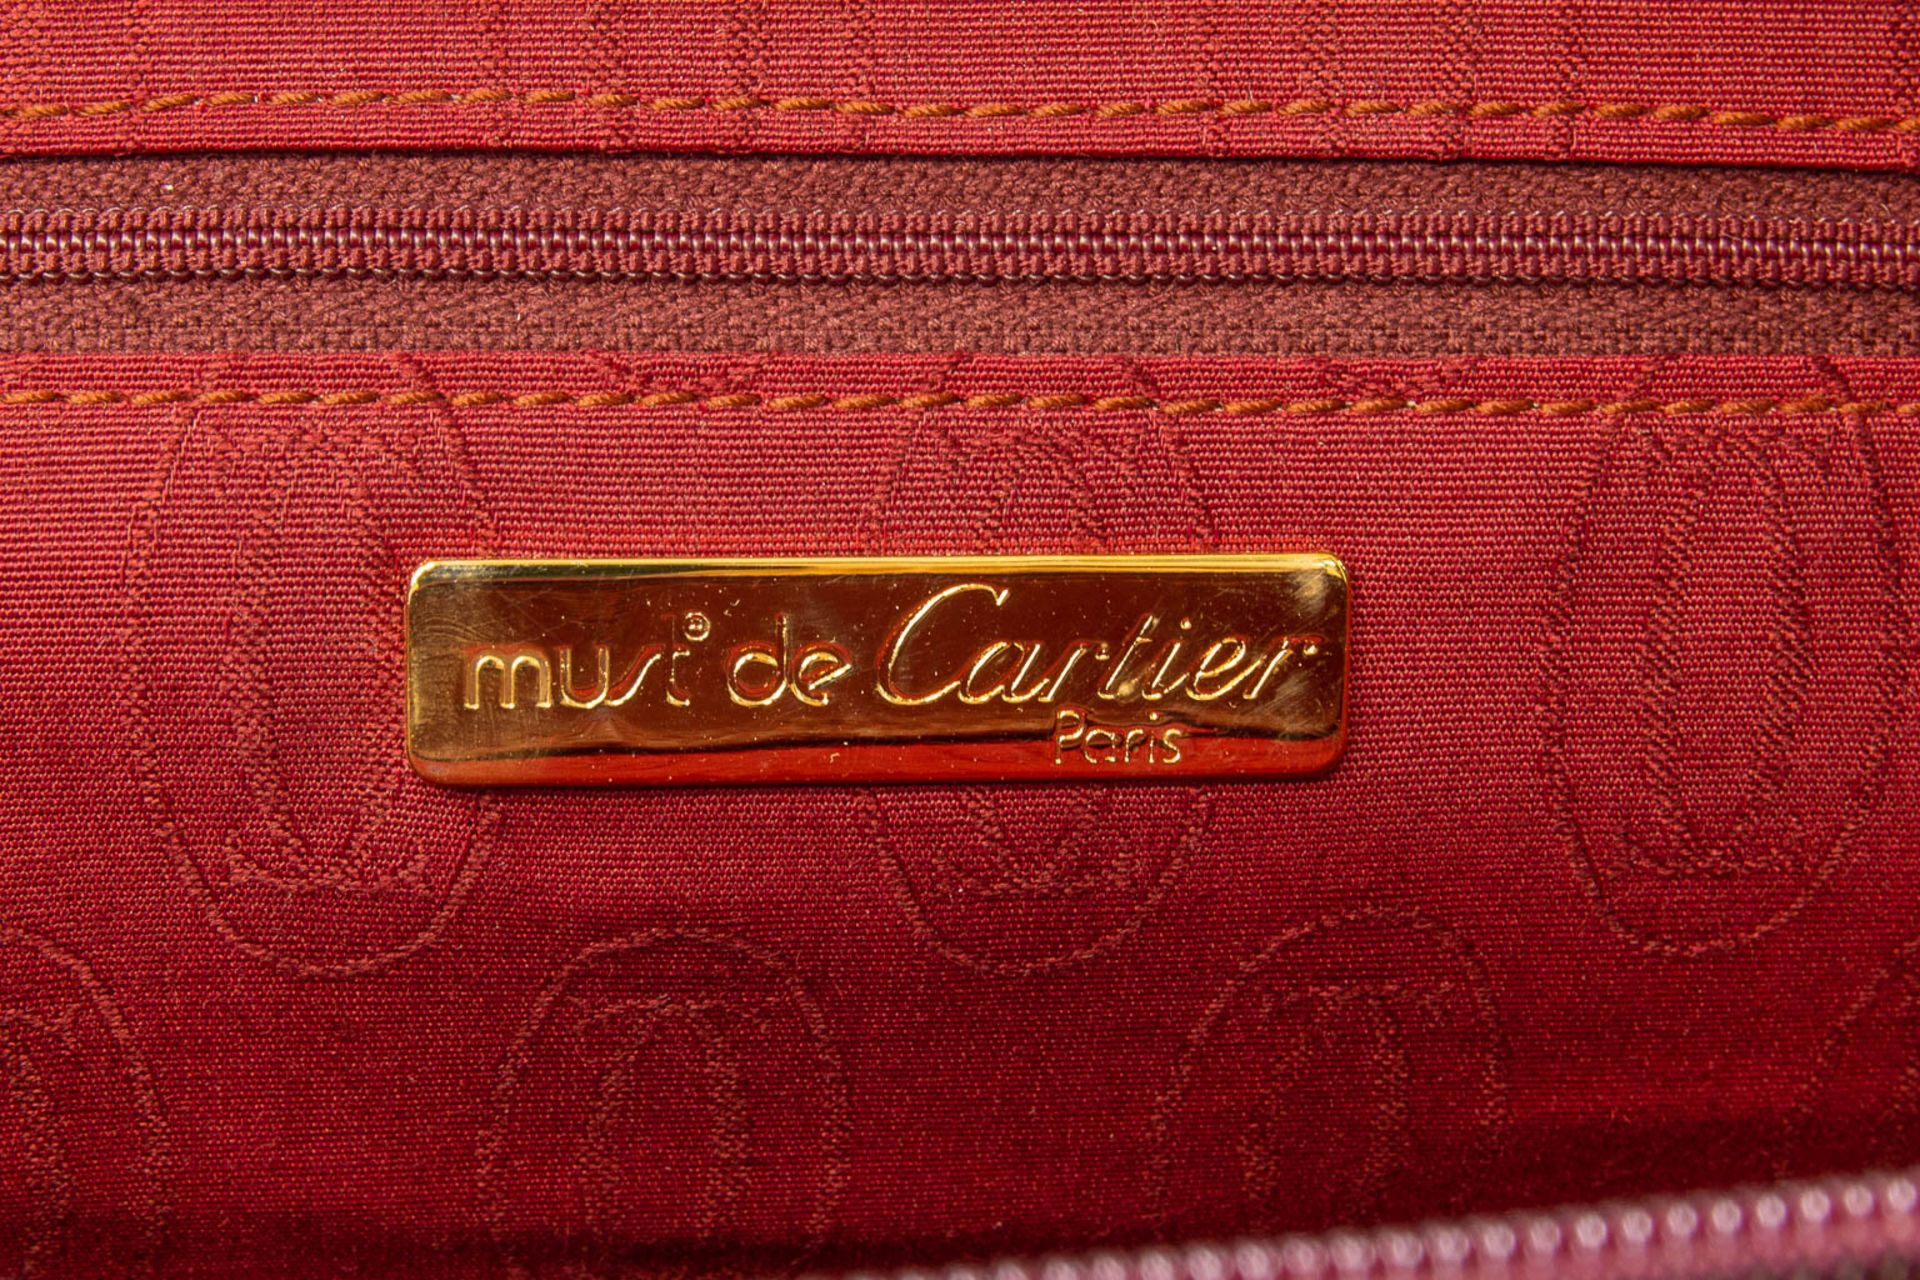 A Must De Cartier brown leather purse or handbag, New condition and in the original box. - Image 20 of 20